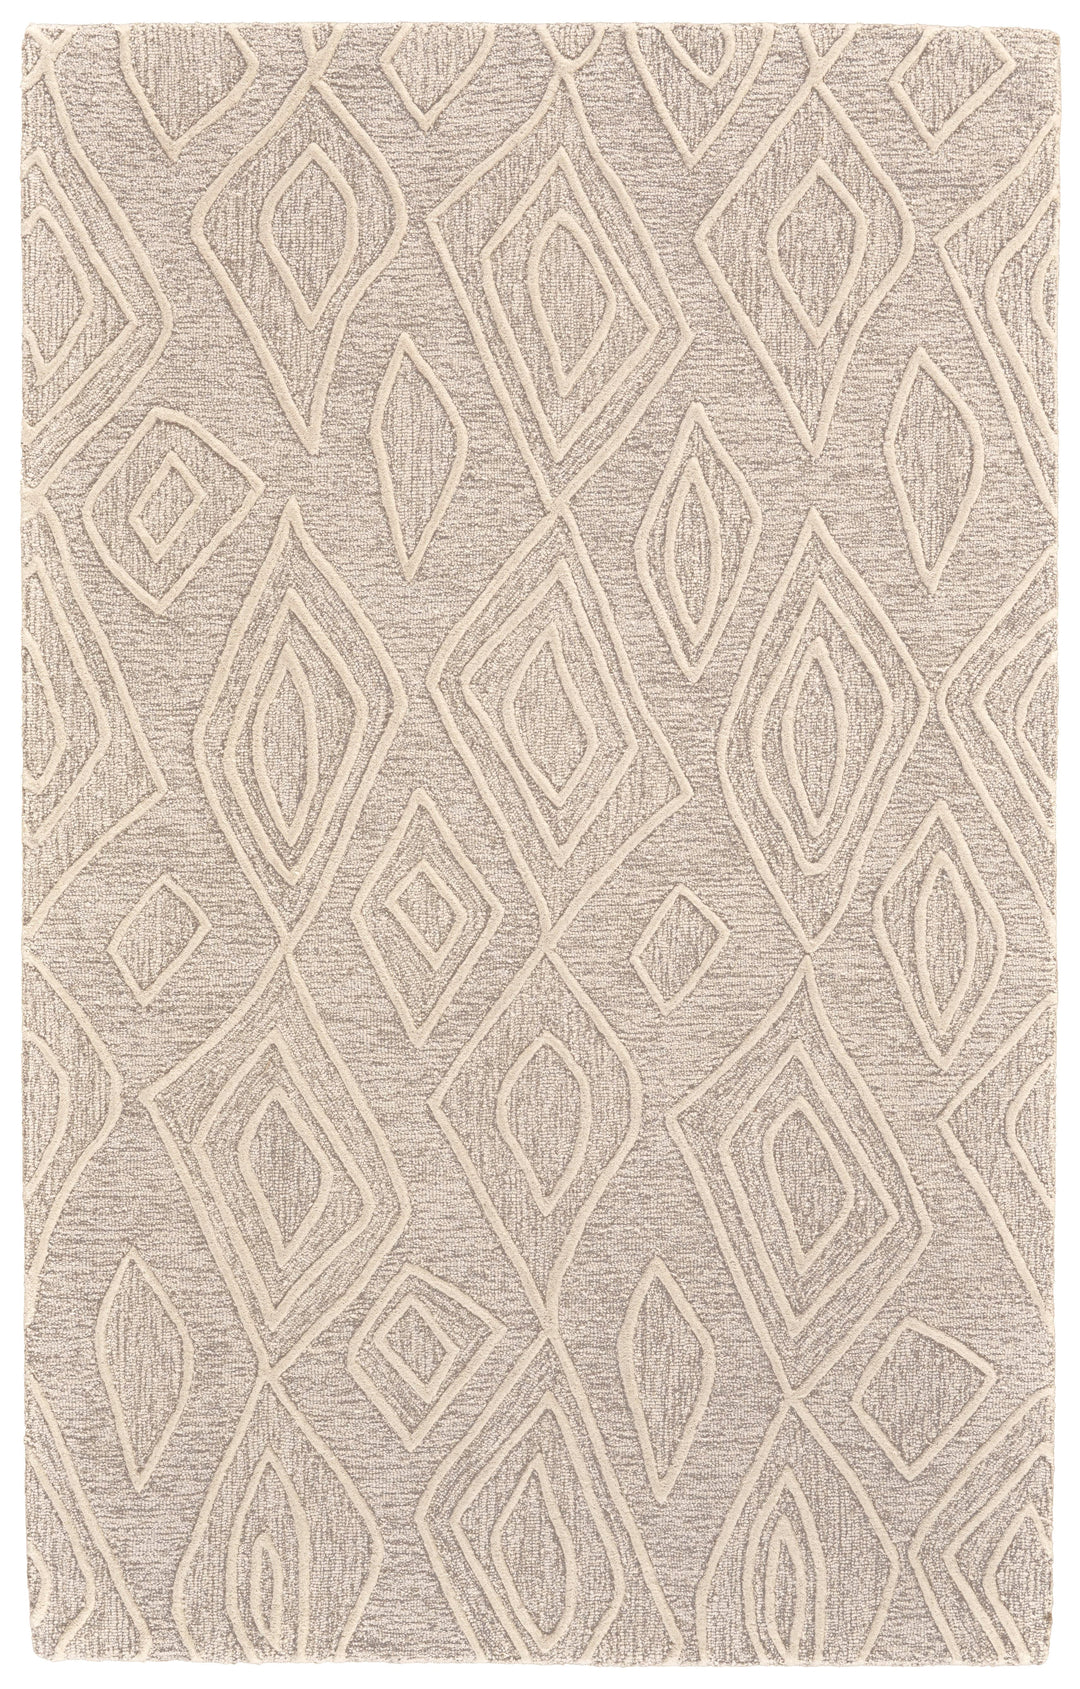 Feizy Feizy Enzo Handmade Minimalist Wool Rug - Ivory & Natural Tan - Available in 6 Sizes 3'-6" x 5'-6" 7428738FIVYNATC50